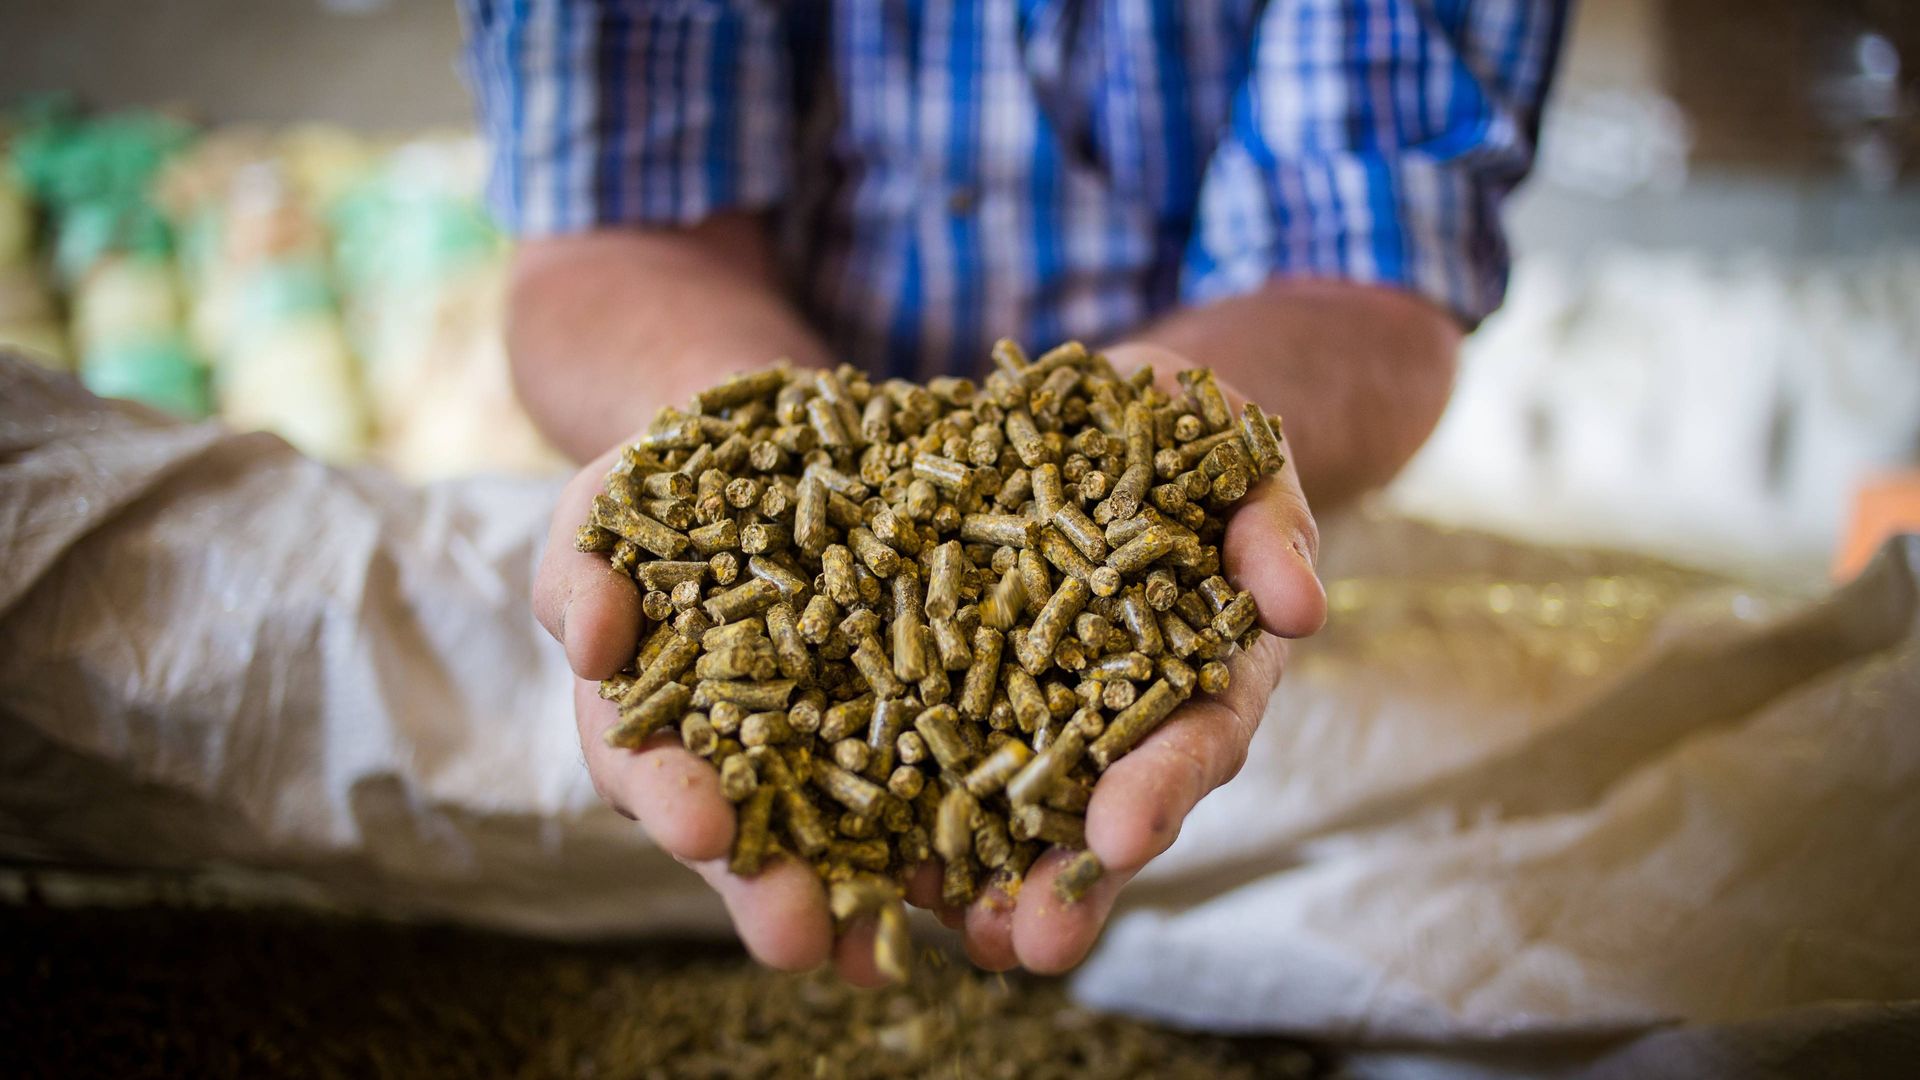 Image of a manufacturer at a feed mill holding compound feed for animals in his hands 